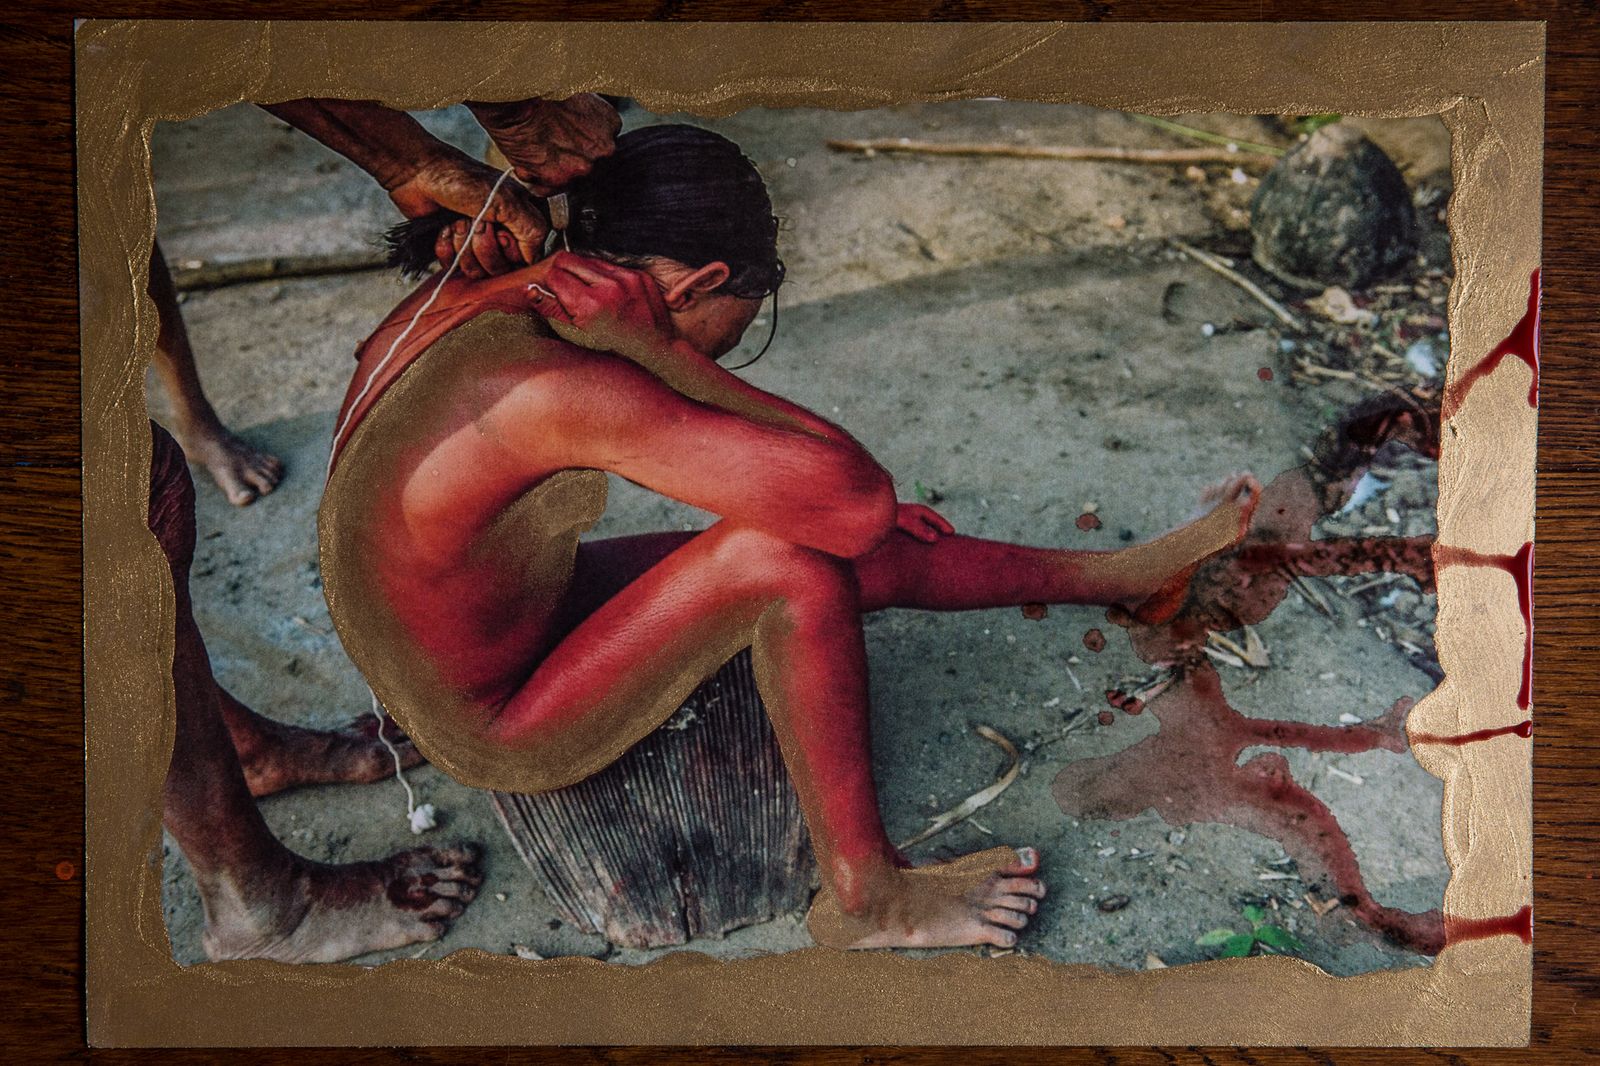 © Leticia Valverdes - Image from the #prayforamazonia photography project